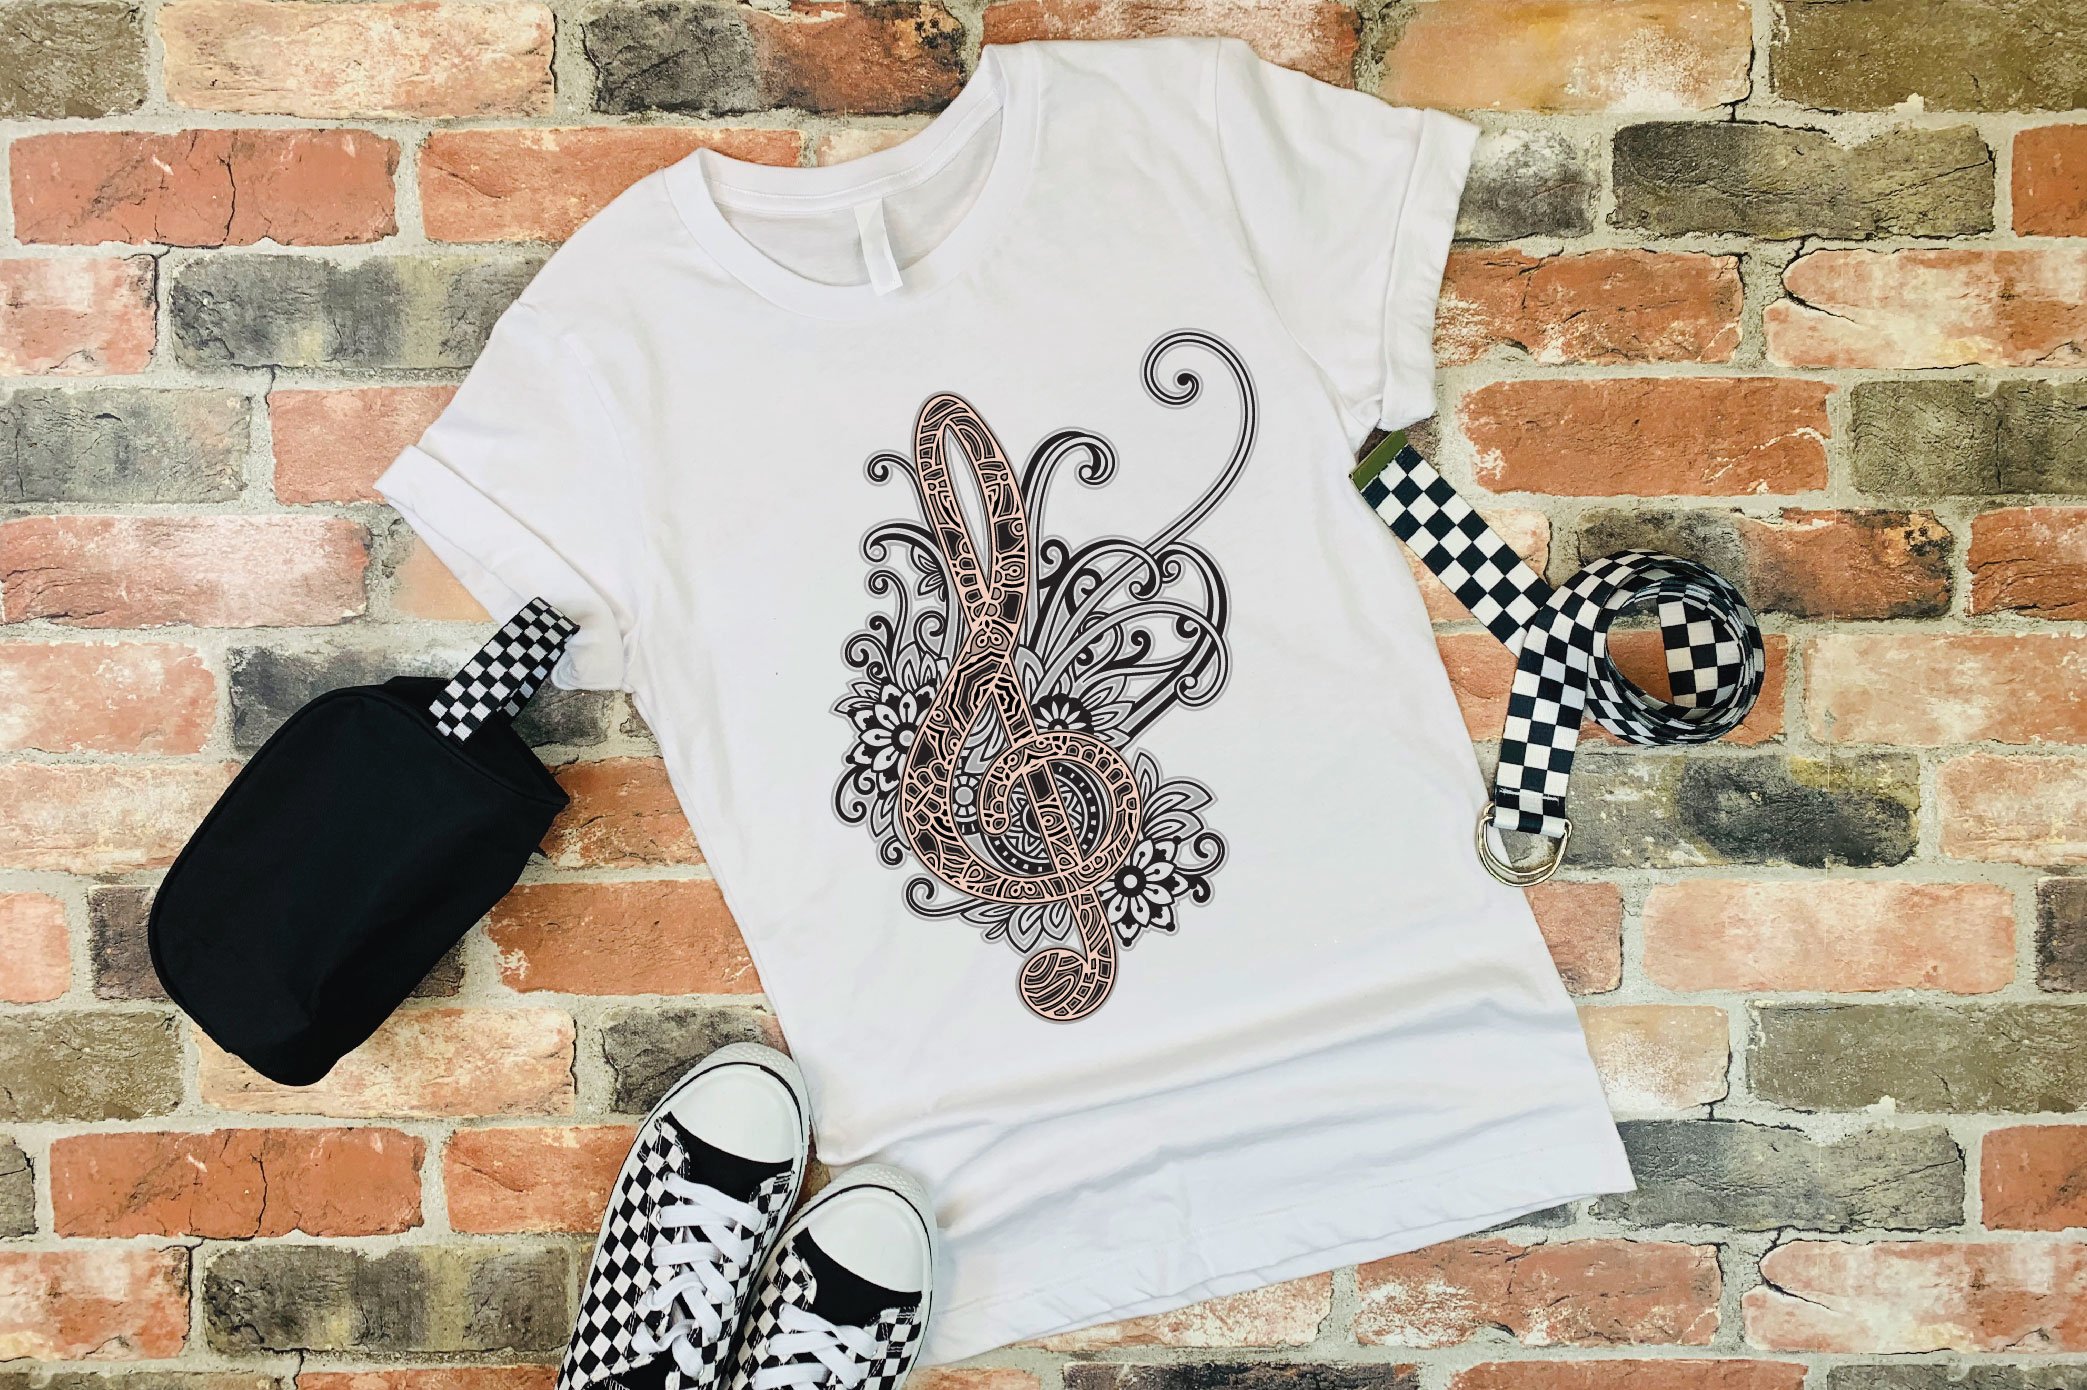 White t-shirt with music note illustration.